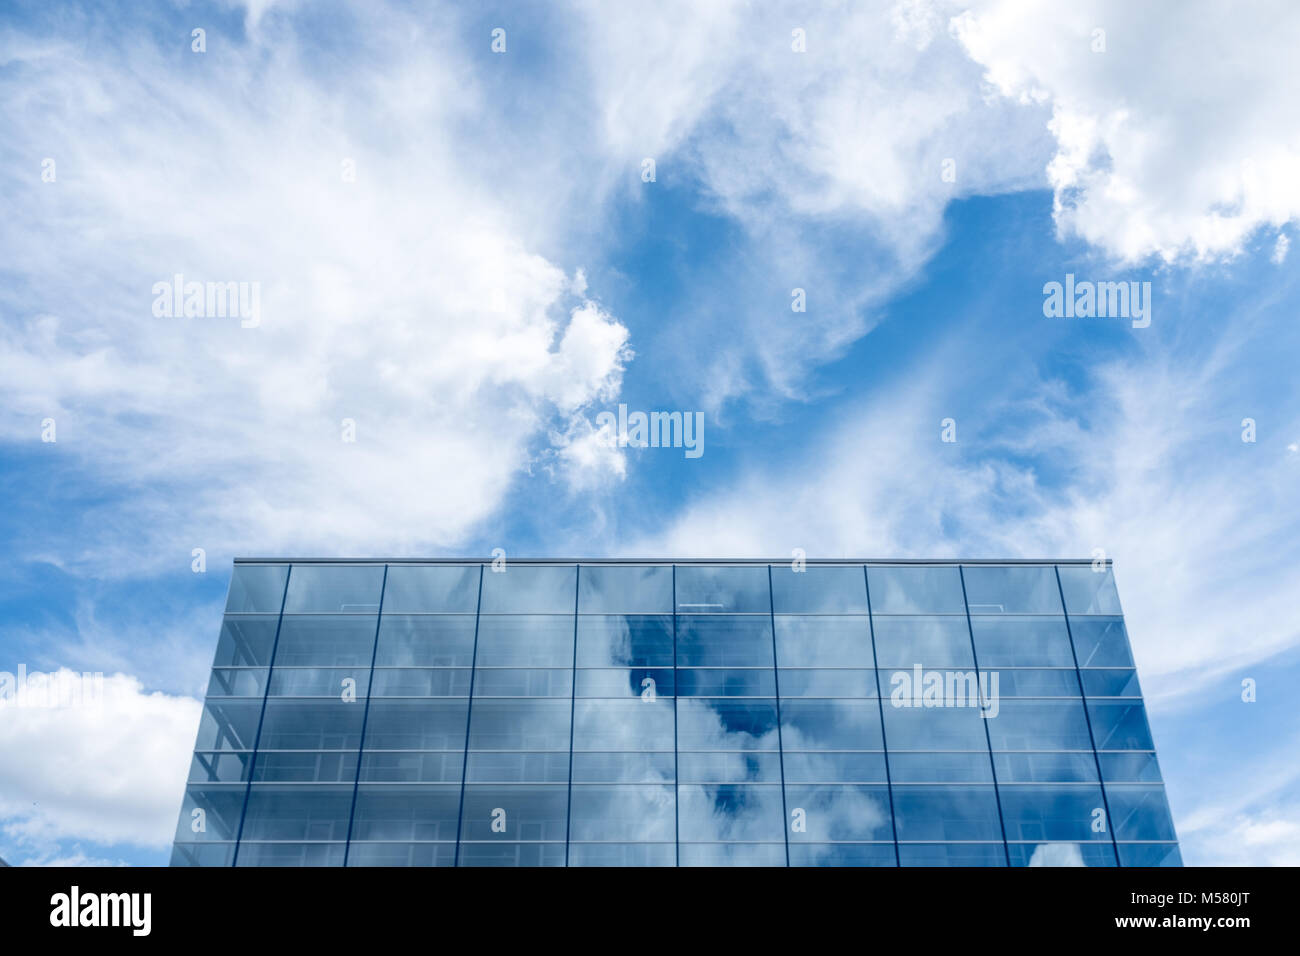 Office building against the blue, cloudy sky, mirroring in the glass front. Stock Photo